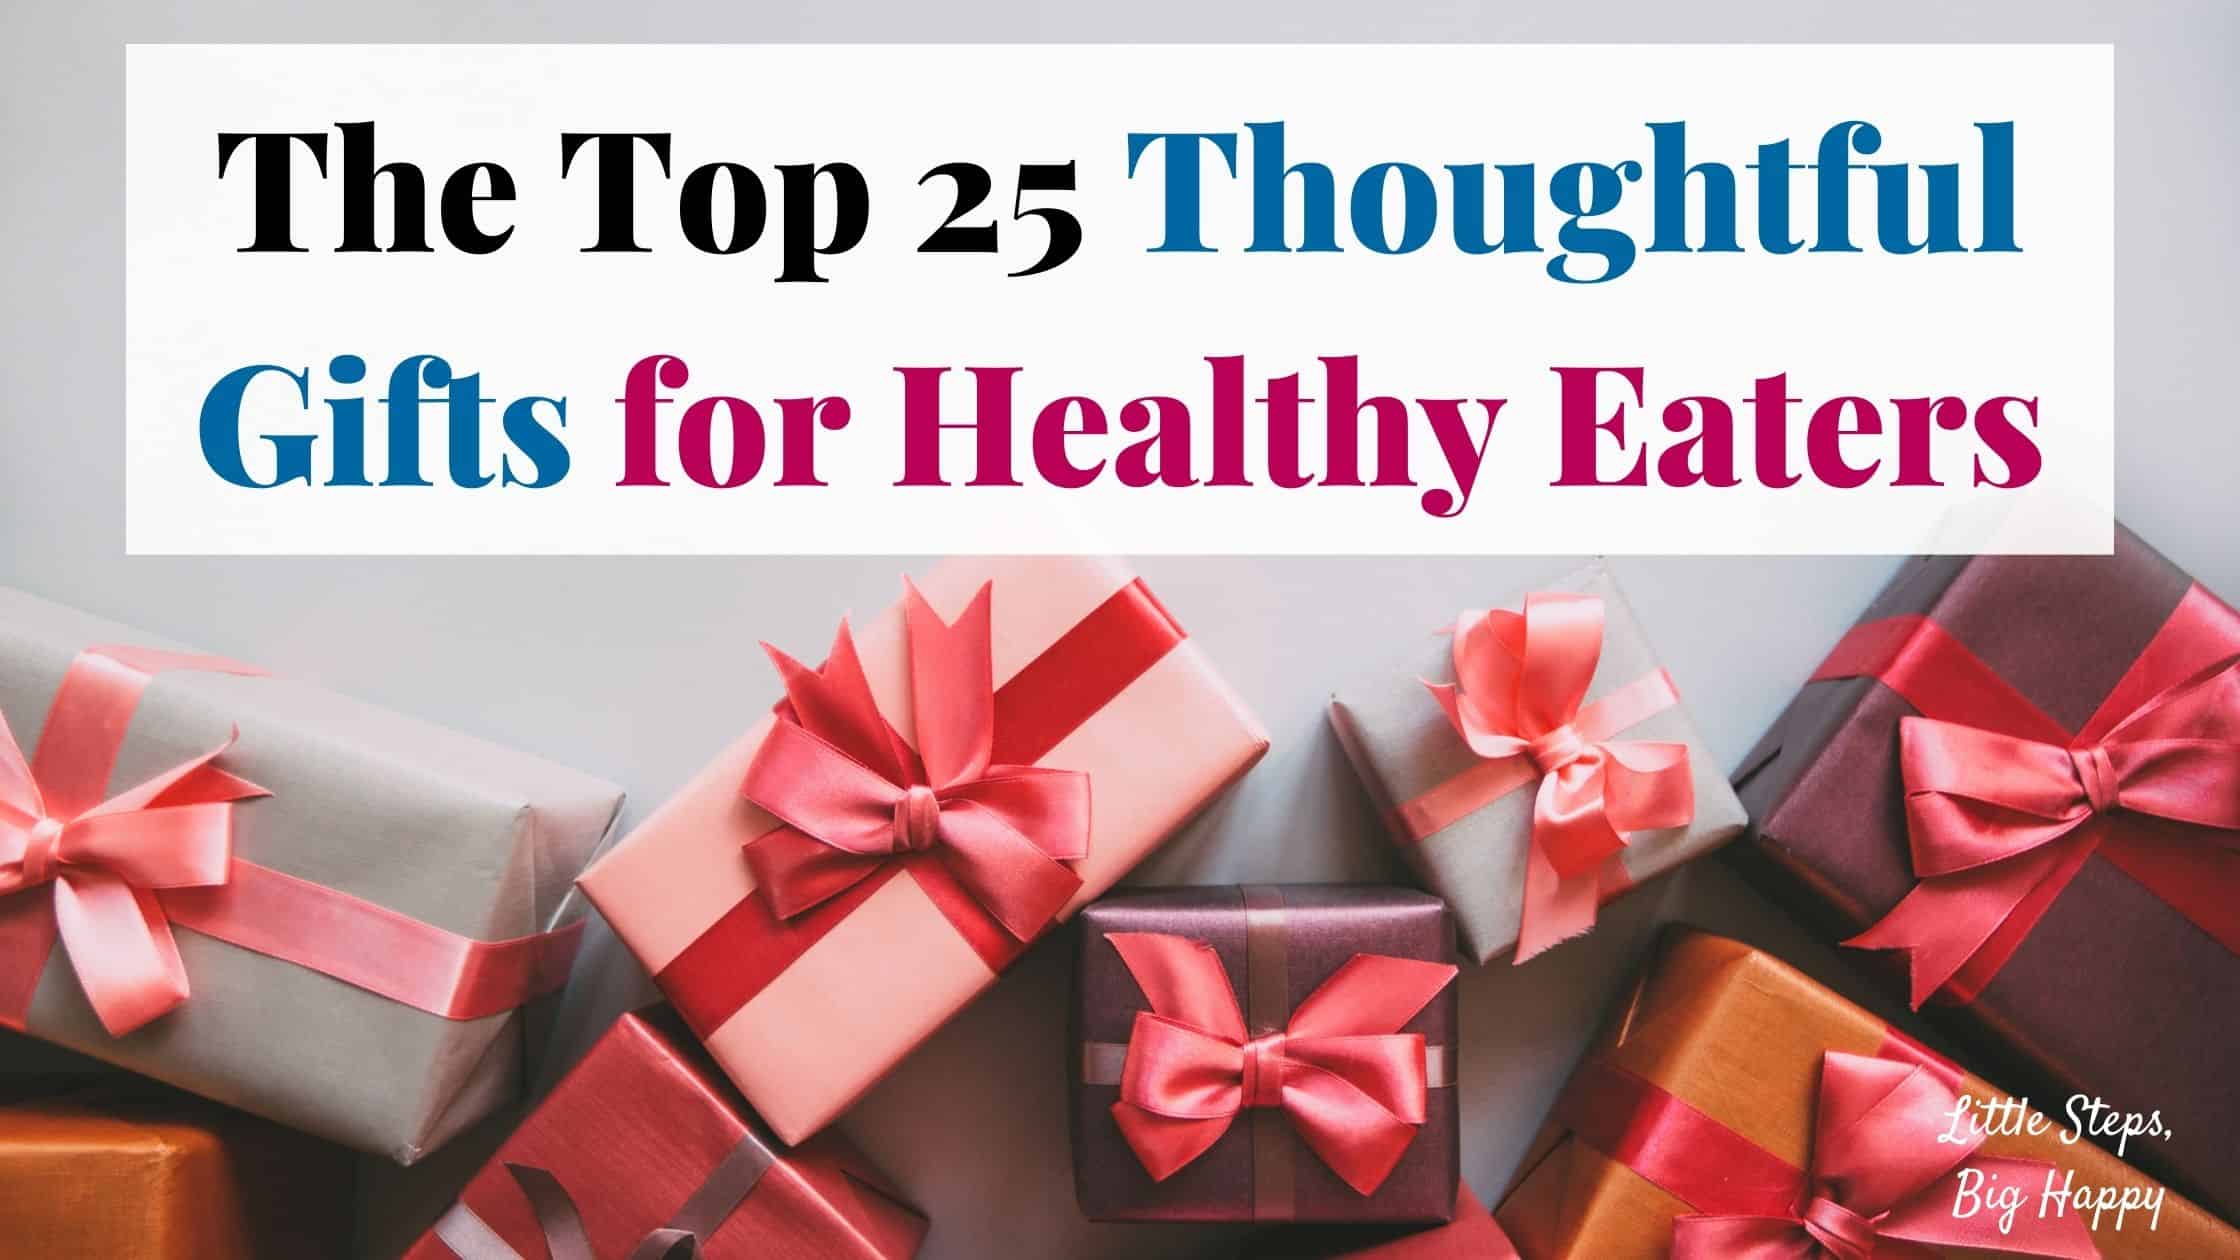 The Top 25 Thoughtful Gifts for Healthy Eaters